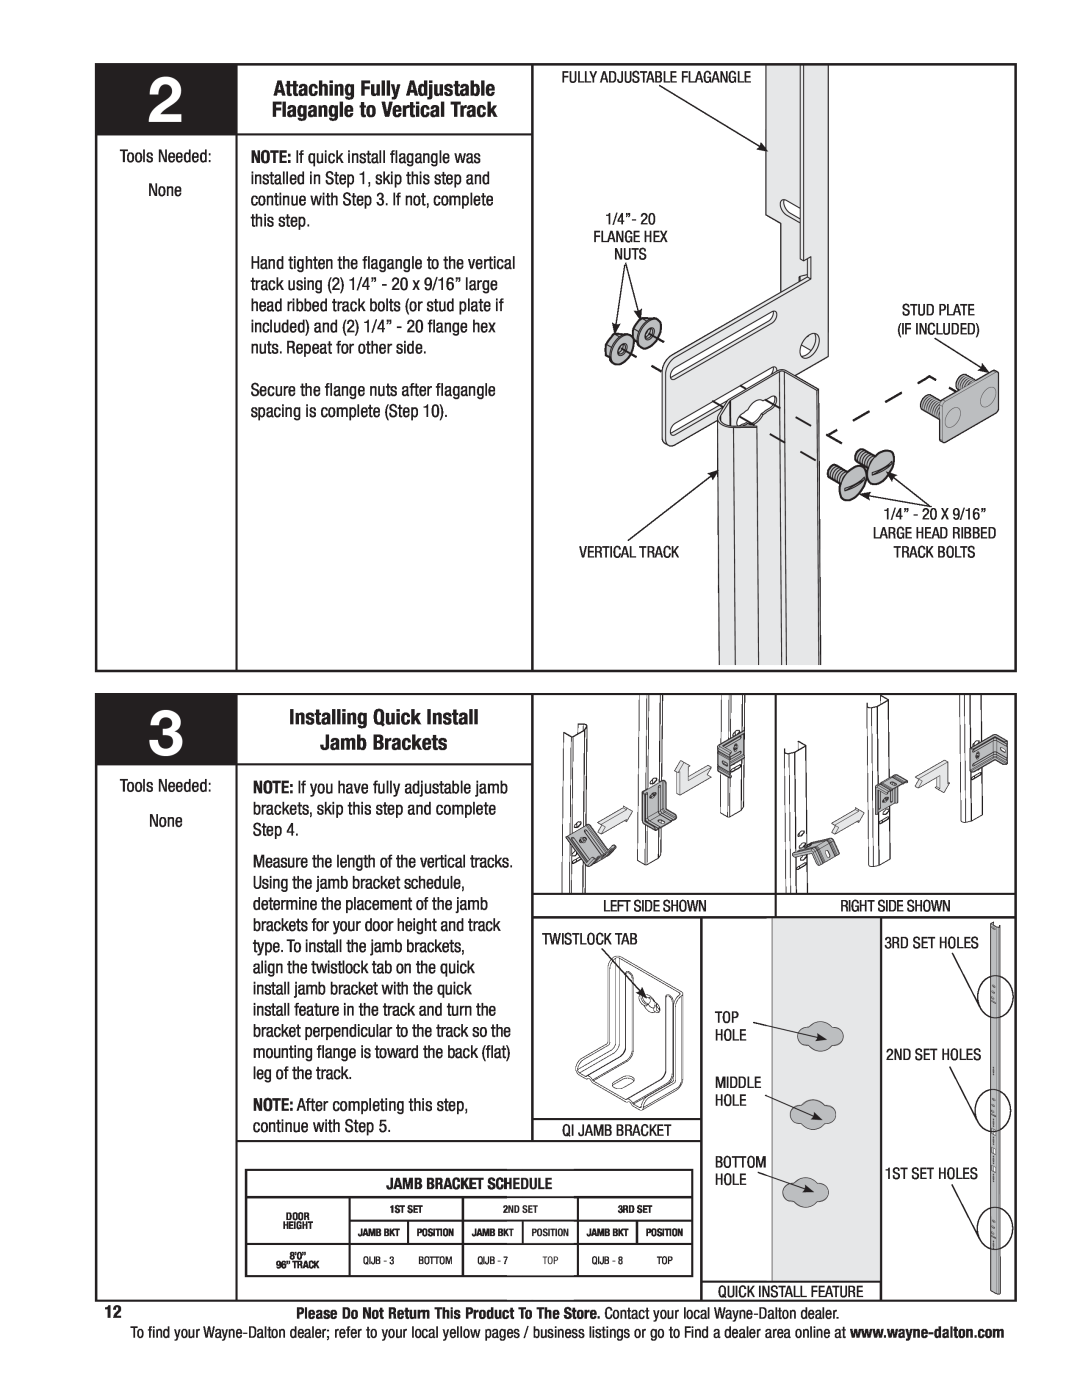 Wayne-Dalton 341785 Attaching Fully Adjustable, Flagangle to Vertical Track, Installing Quick Install, Jamb Brackets 